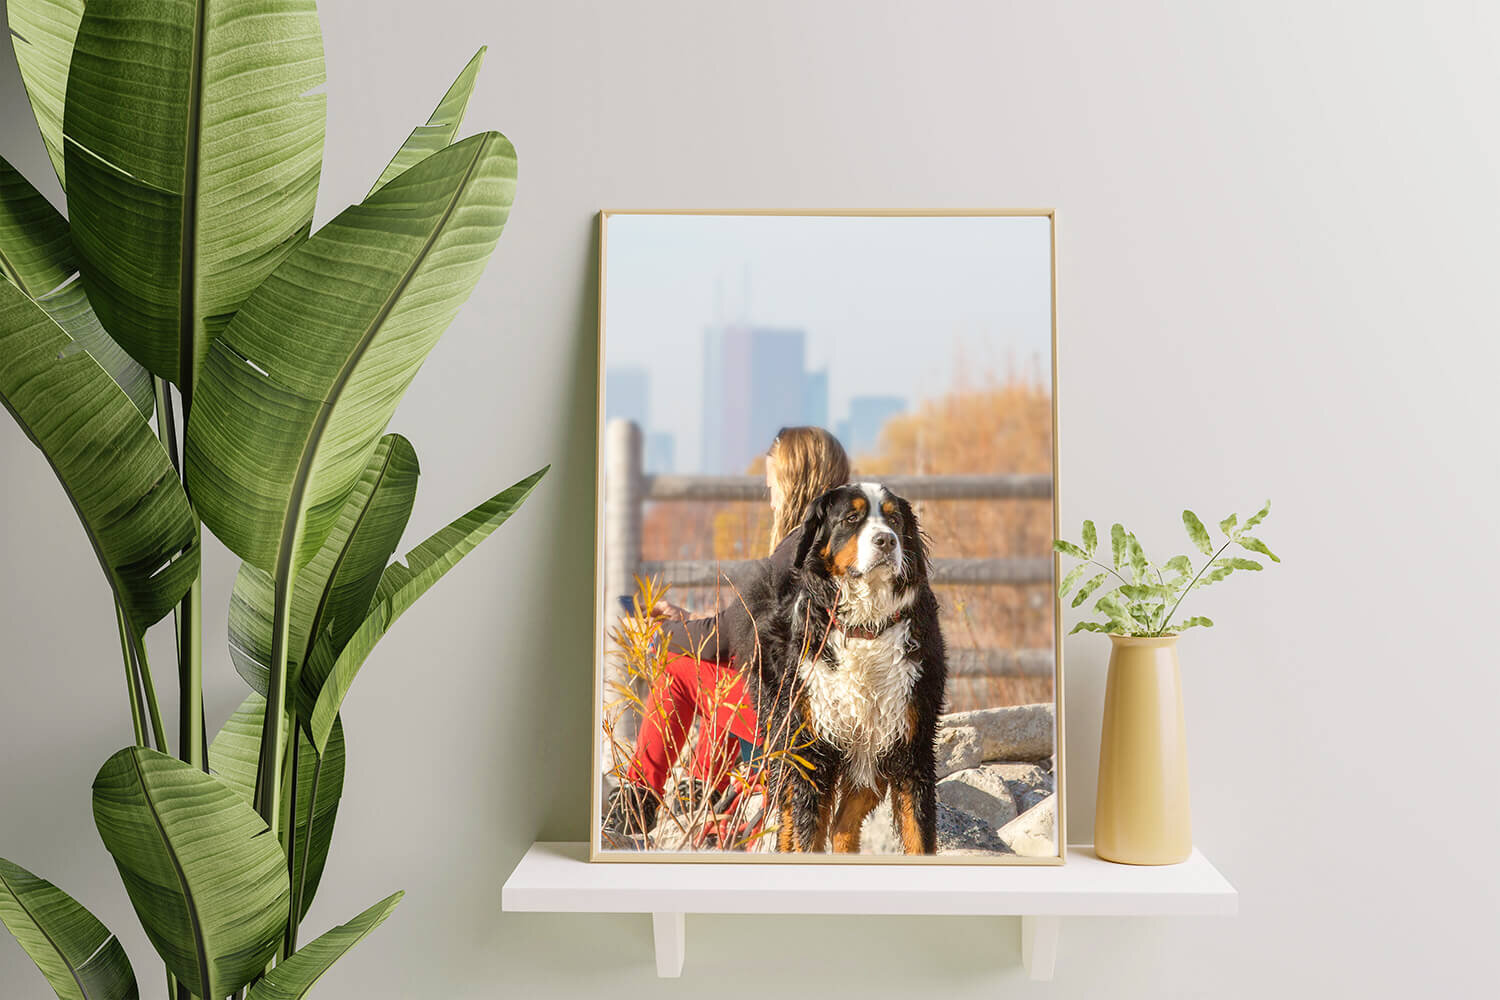 FRAMED PHOTO ON A SHELF IS AN EASY WAY TO DISPLAY SMALLER PRINTS